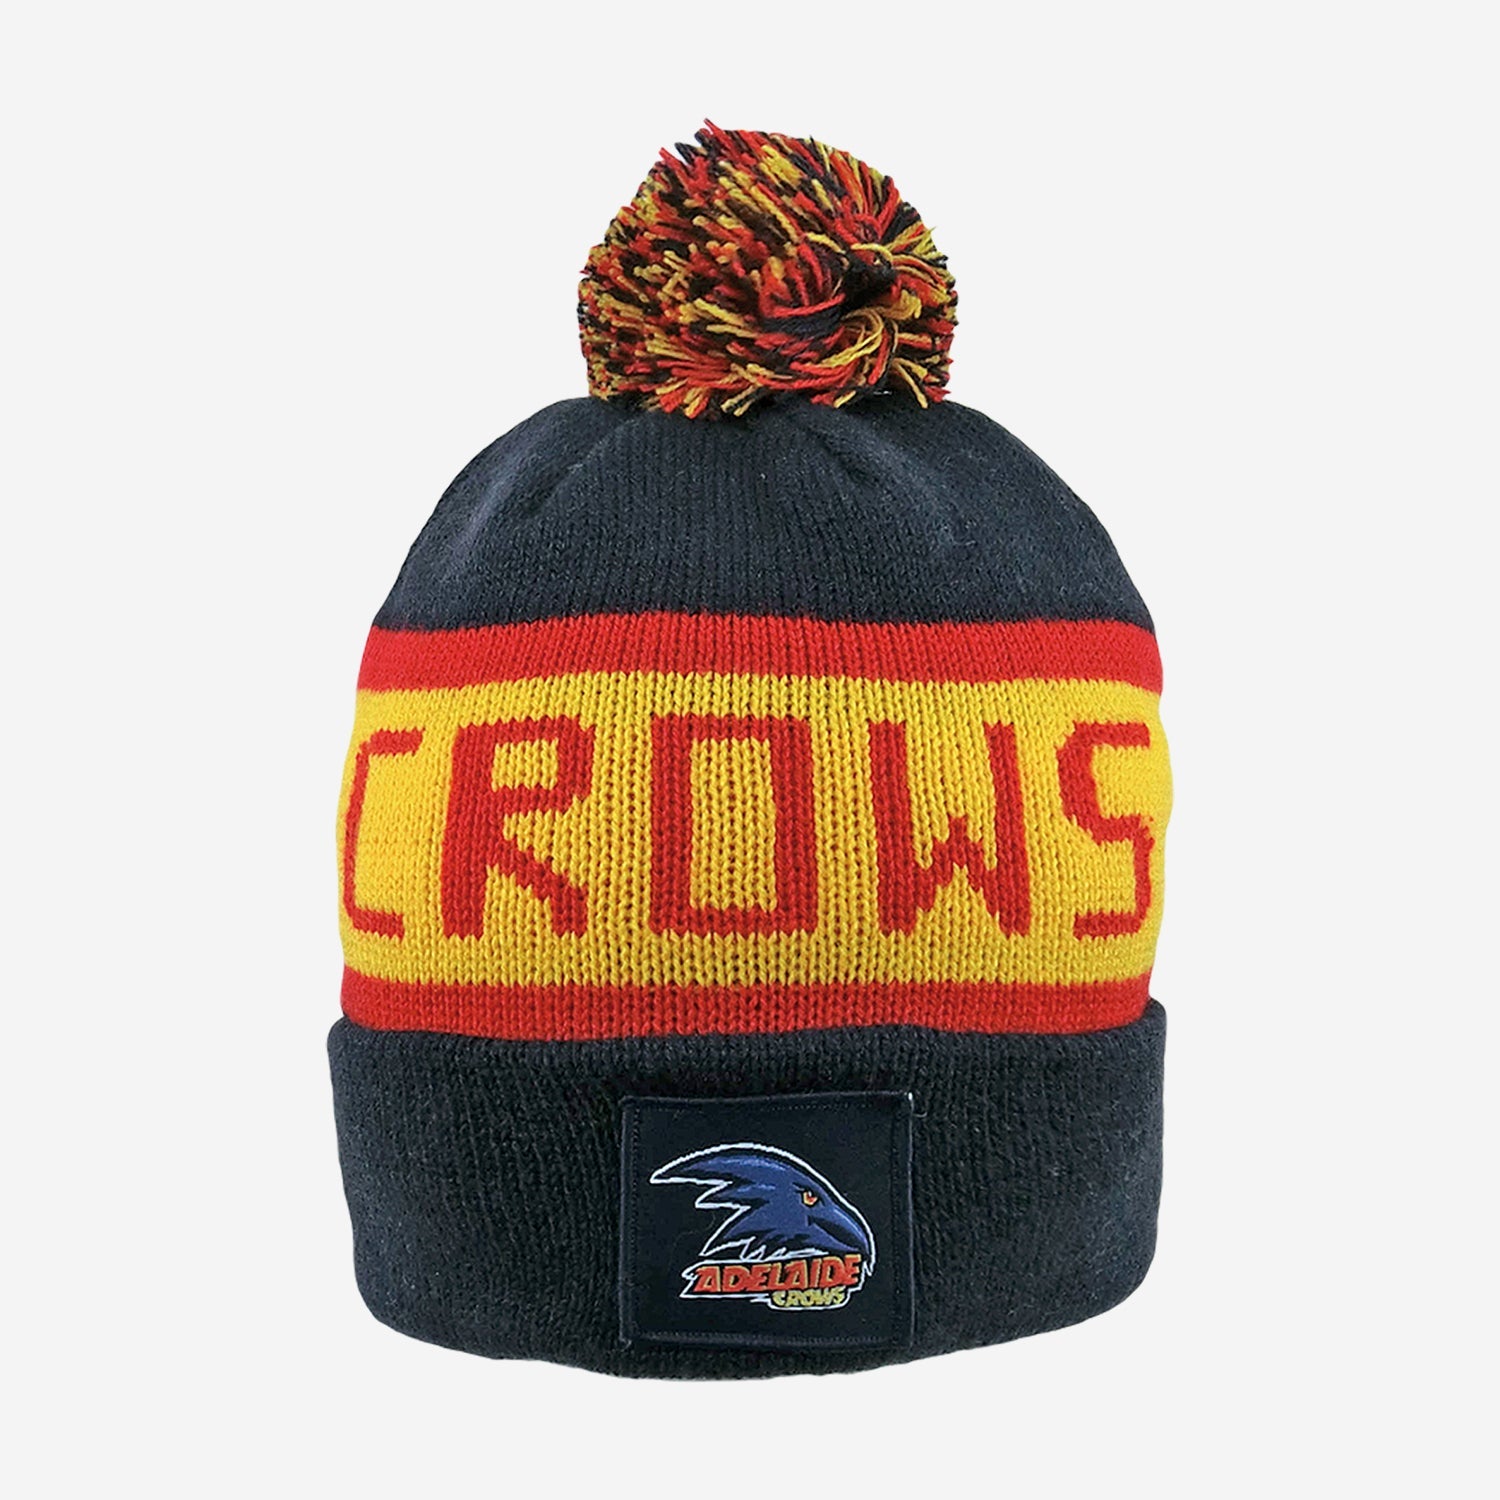 Adelaide Crows - Beanie - The Cricket Warehouse